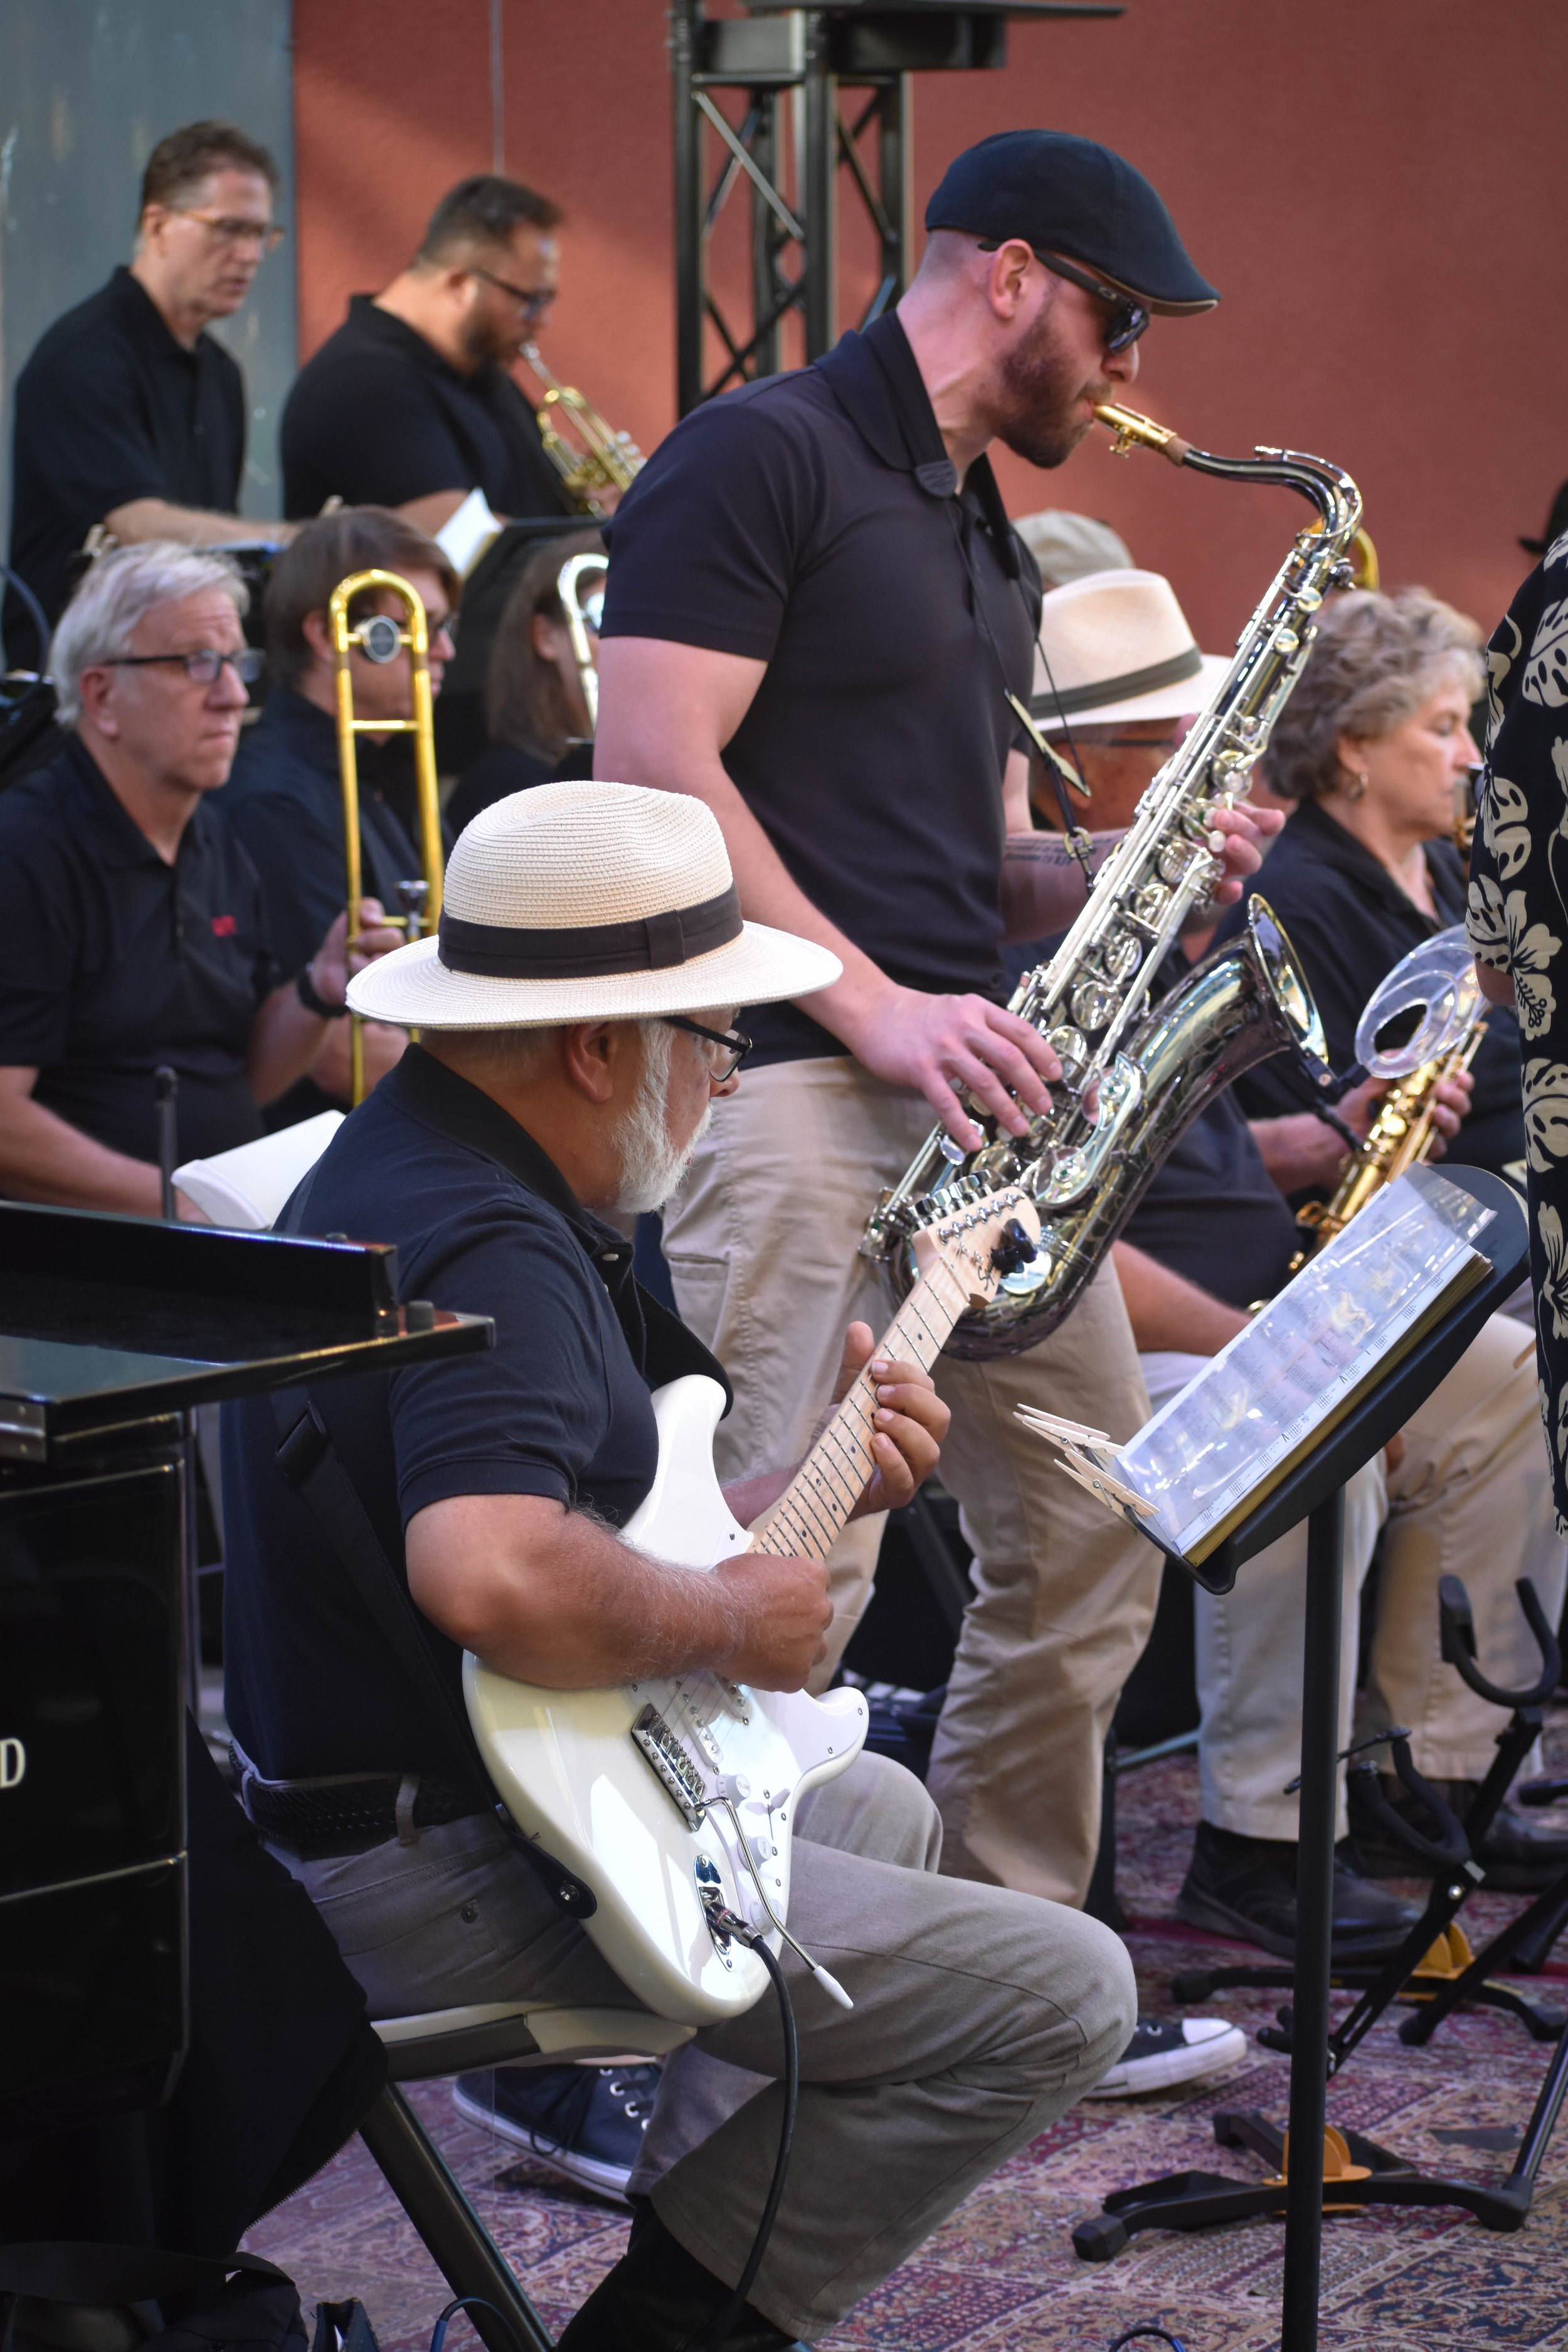 07-10-2023 Laguna Jazz Band concert at Pageant of the Masters by Peyton Webster62-57.jpg